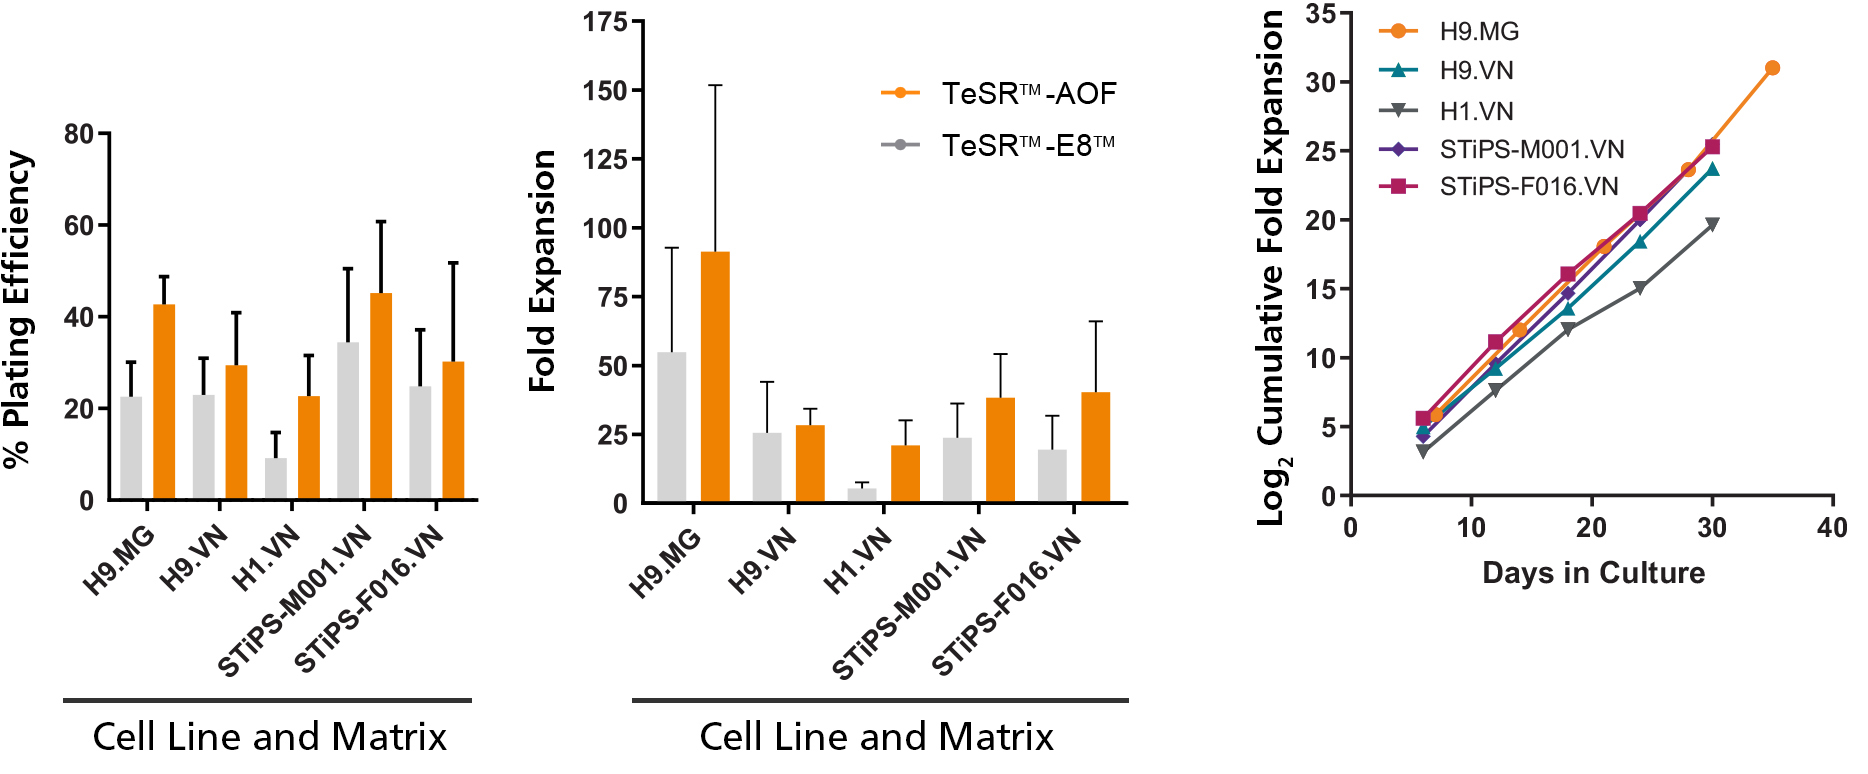 hPSCs Maintained in TeSR™-AOF Have Improved Attachment and Higher Overall Expansion Compared to Low-Protein Medium